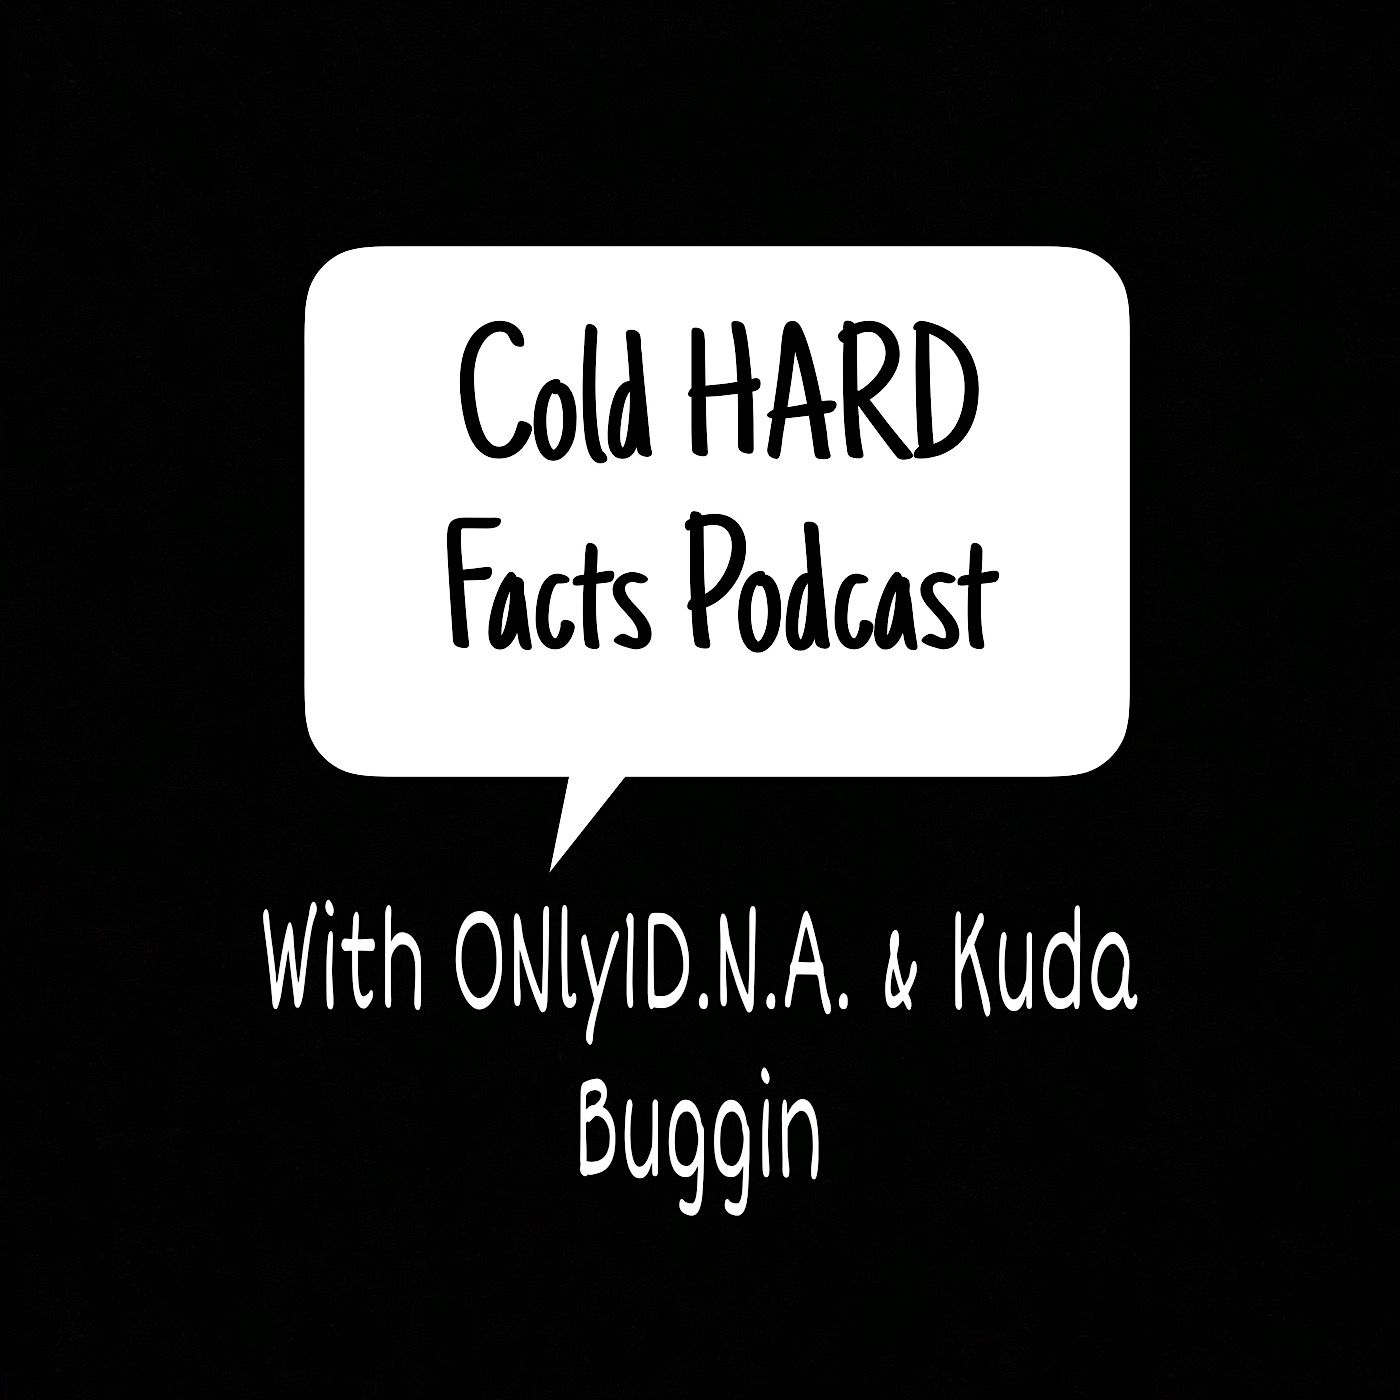 Cold HARD Facts Podcast’s show